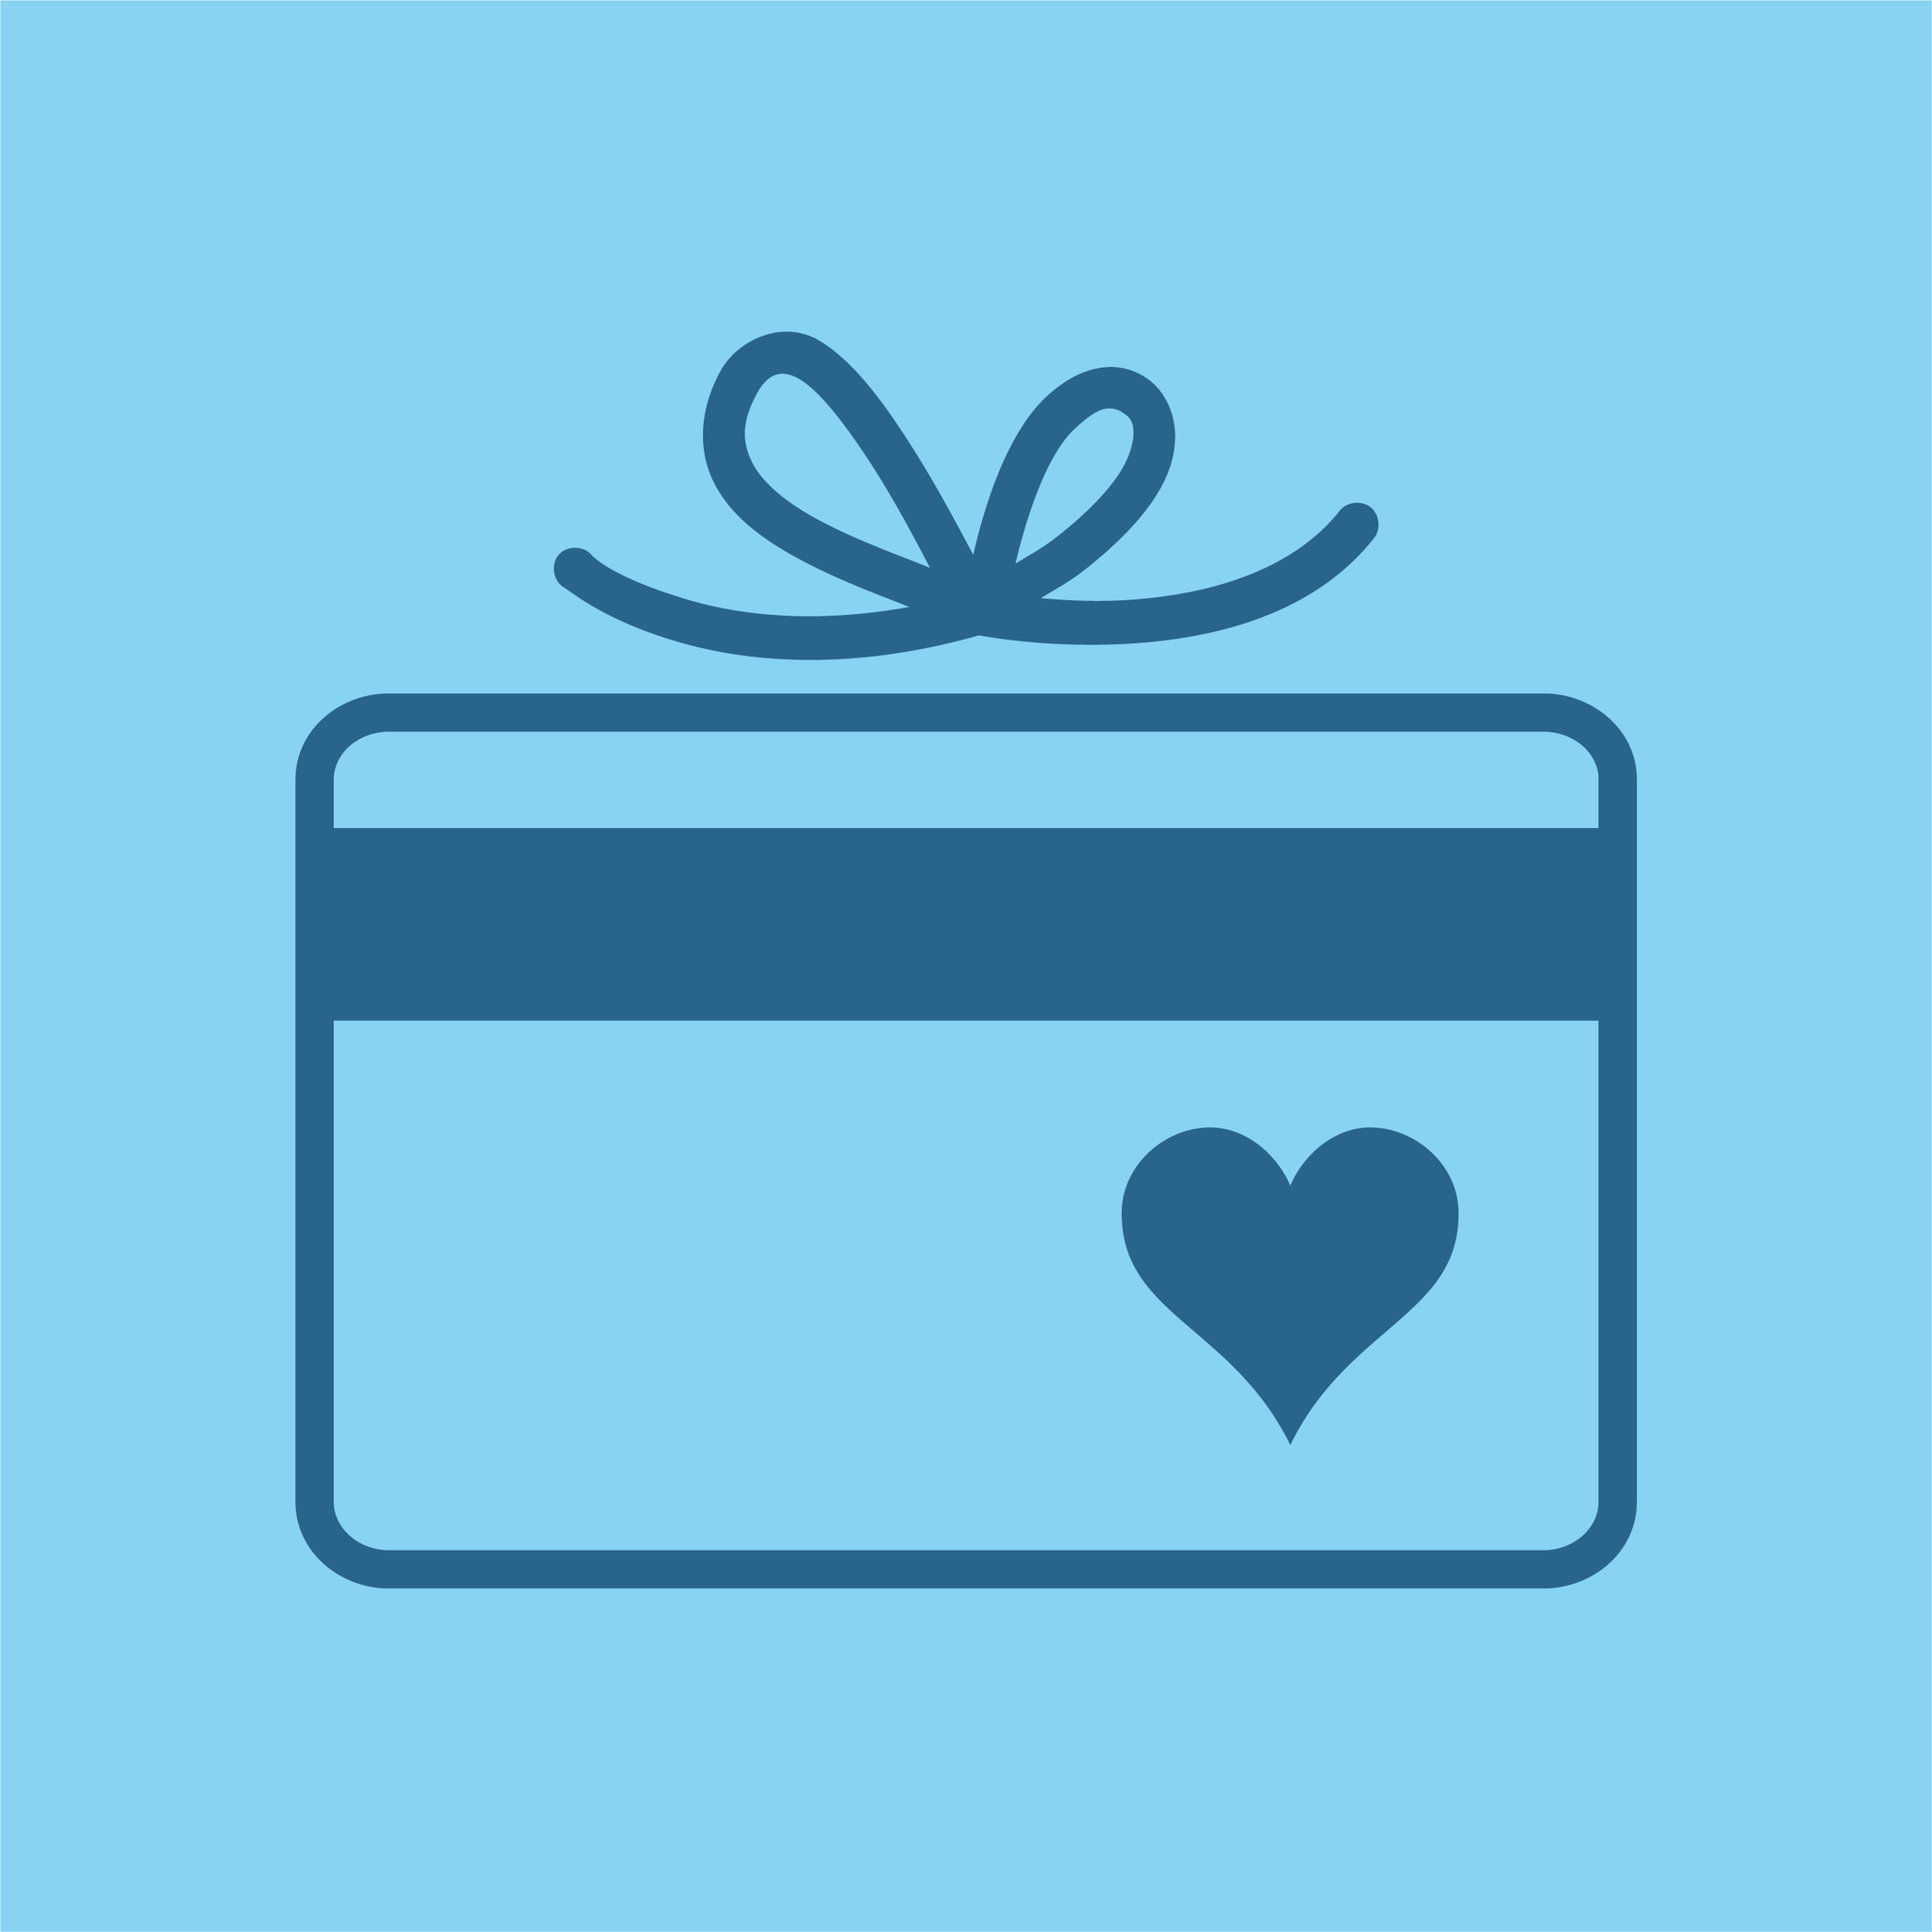 Gift, gift card, present, shopping card icon | Icon search engine